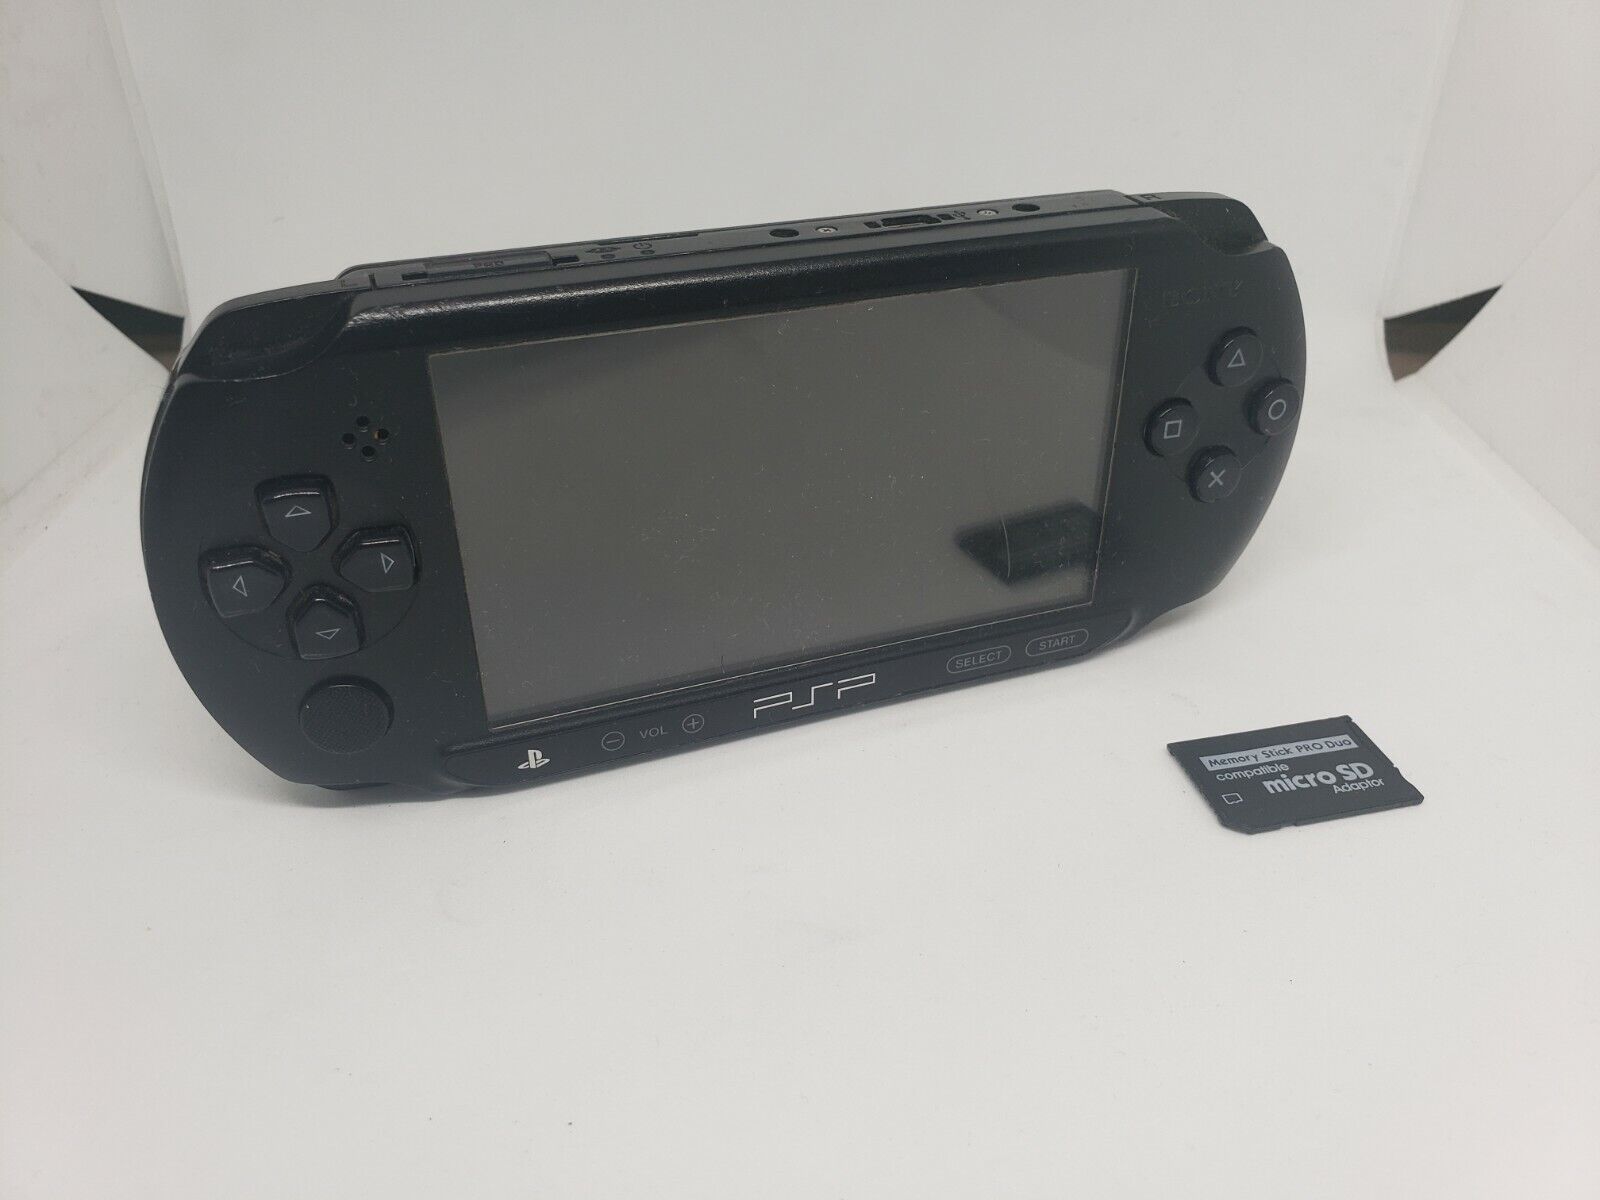 RARE! PSP-E1000 4GB Launch Edition Charcoal Black Handheld System 4+ Games